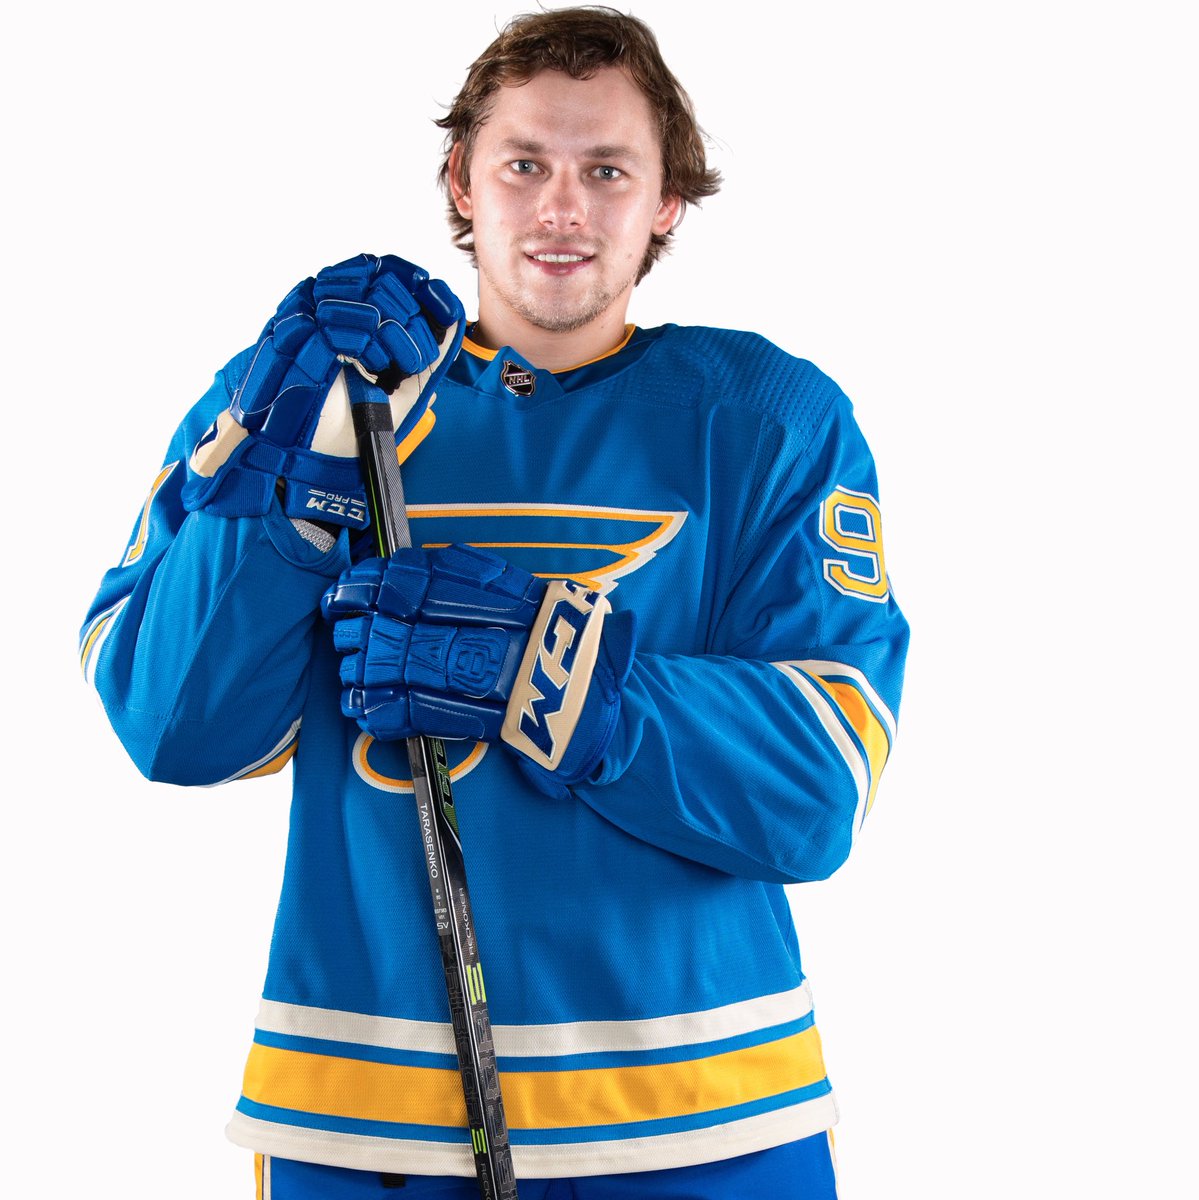 st louis blues throwback jersey